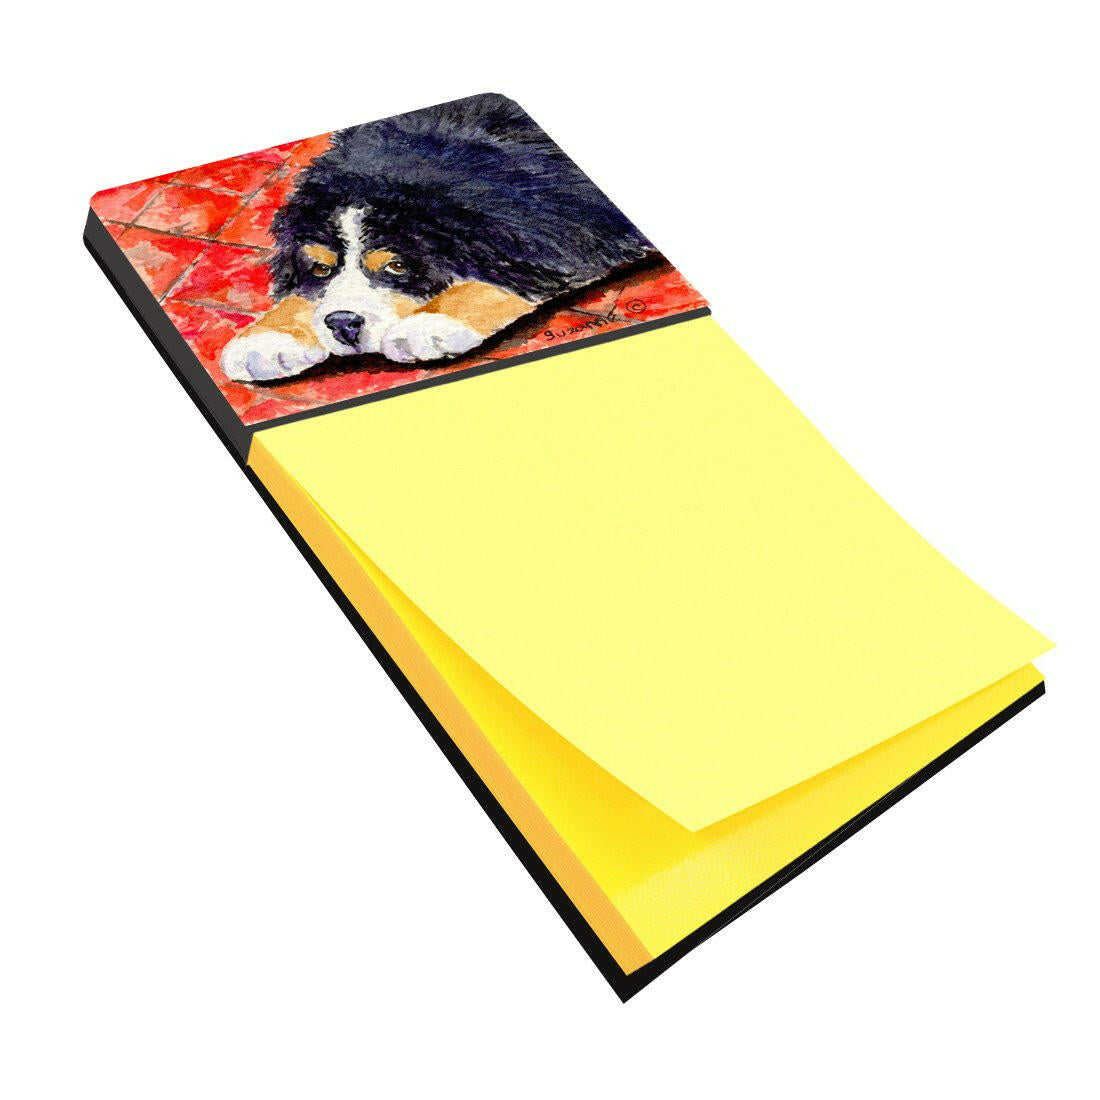 Bernese Mountain Dog Refiillable Sticky Note Holder or Postit Note Dispenser SS8842SN by Caroline's Treasures